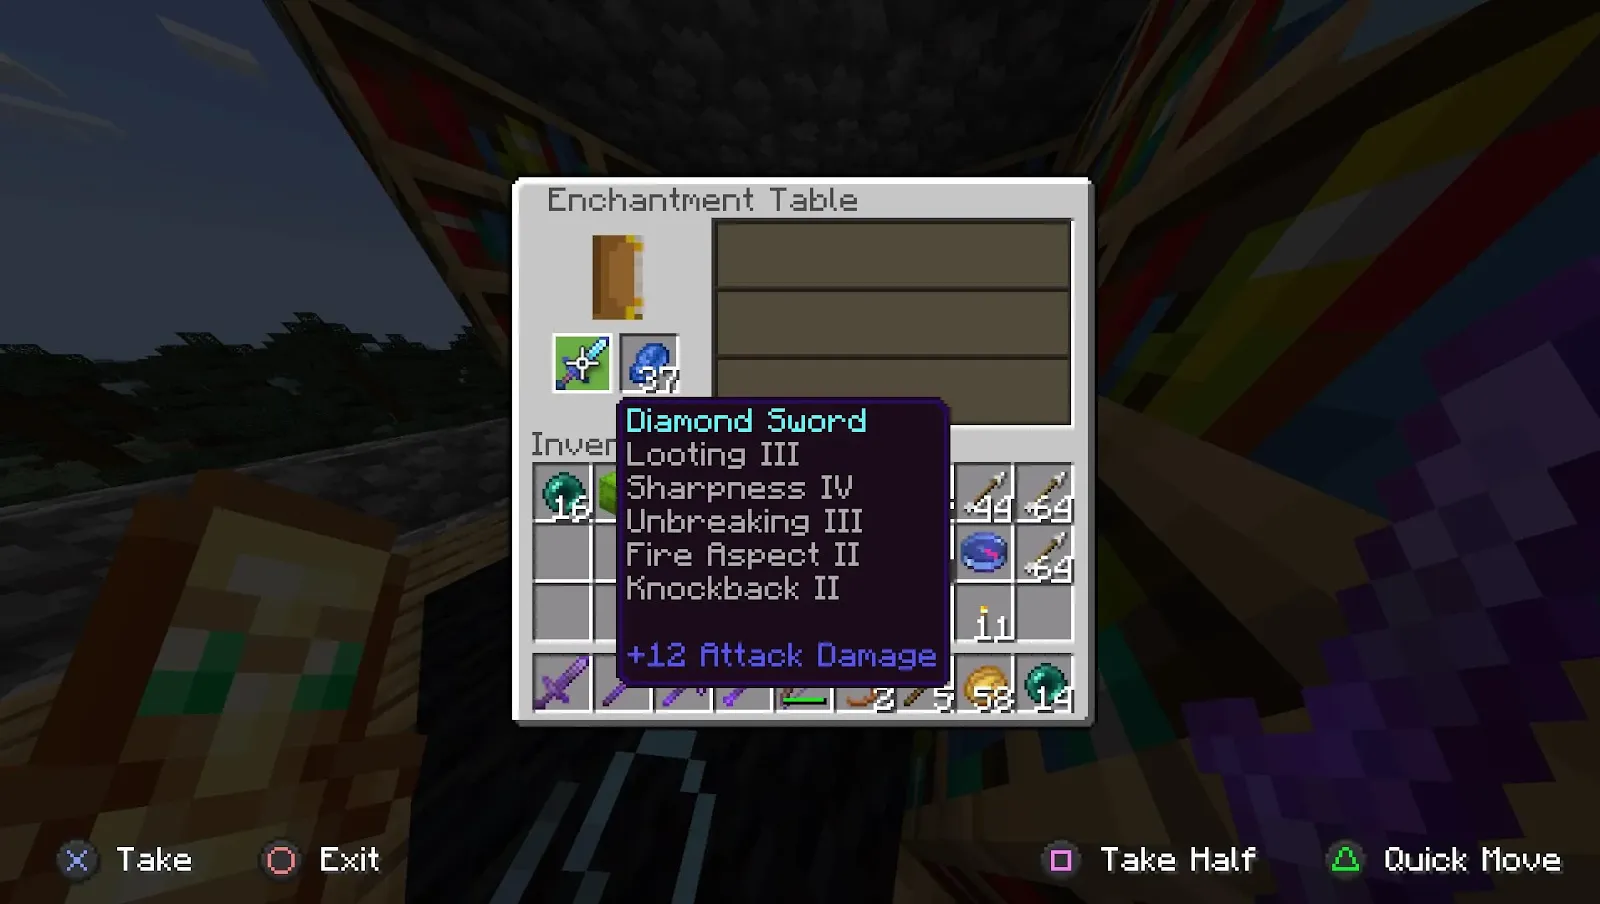 An image of a sword in Minecraft with various different enchantments.